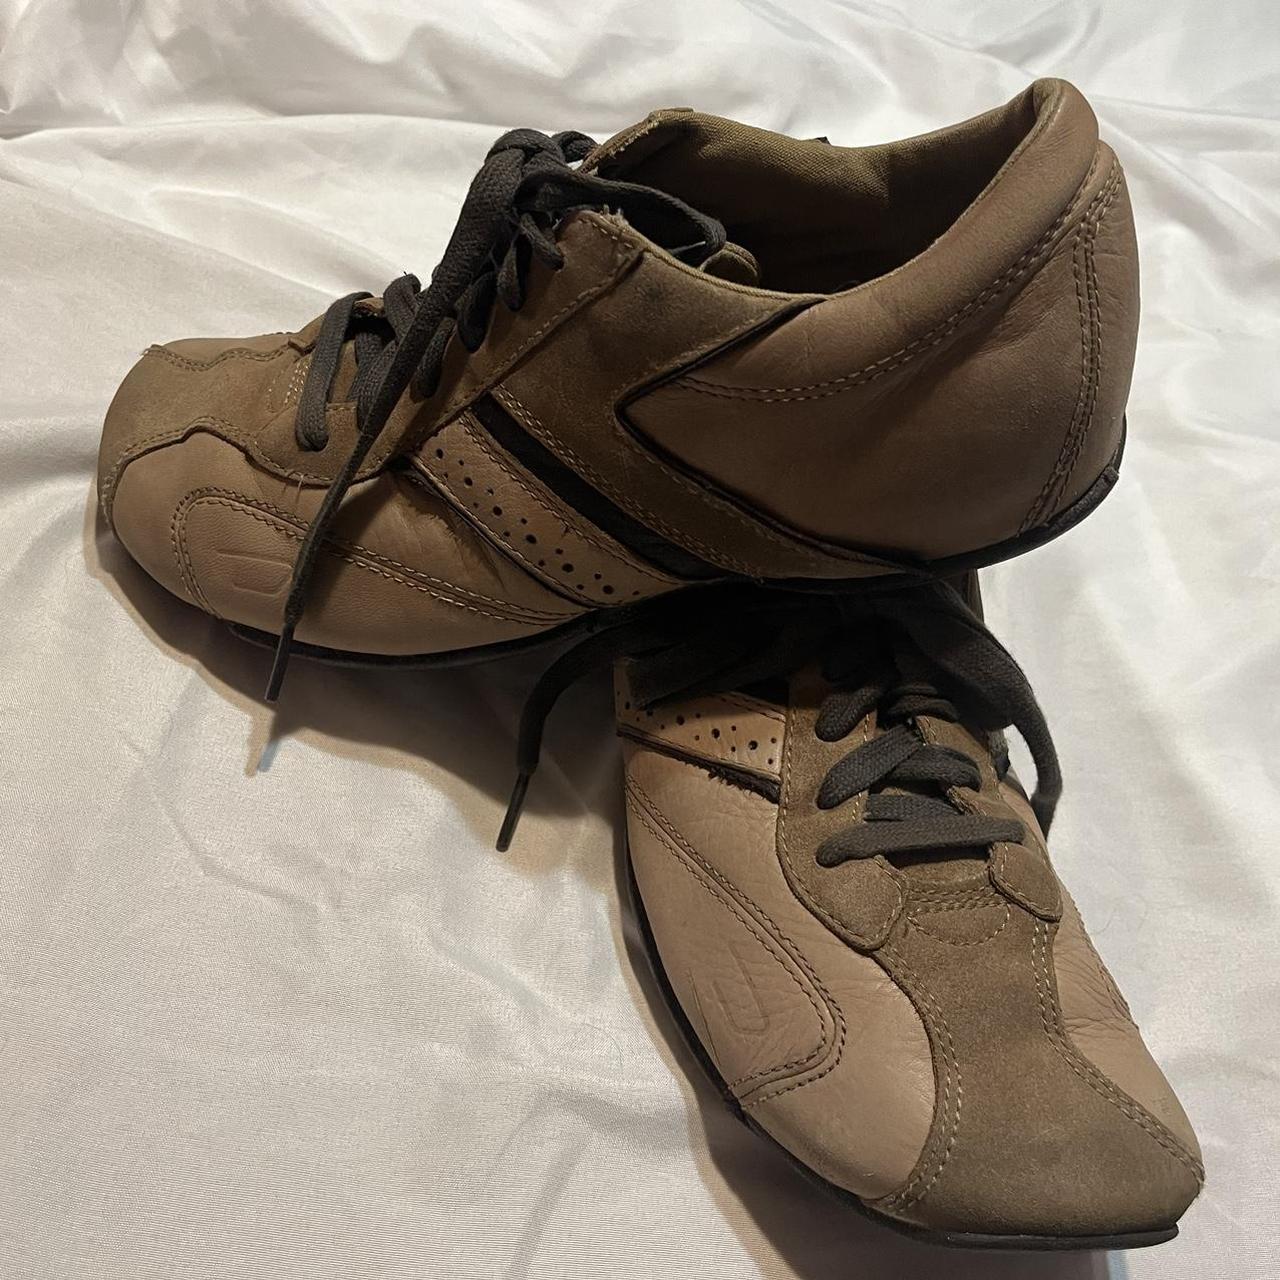 DIESEL Windom Casual leather shoes. Great condition, - Depop